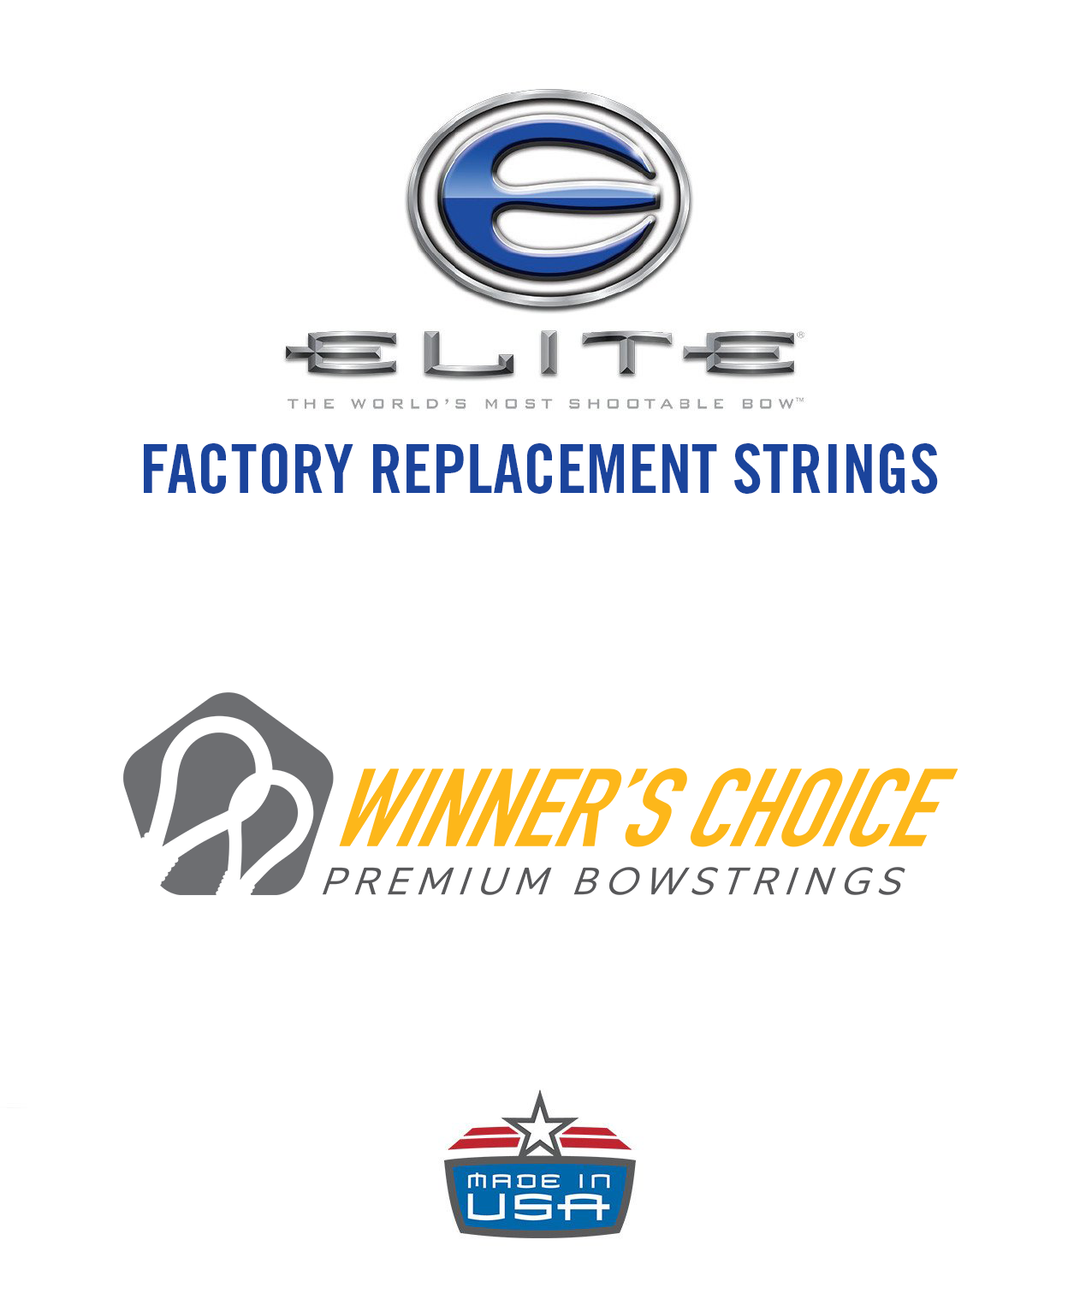 Genuine Elite Replacement Strings from Winner's Choice